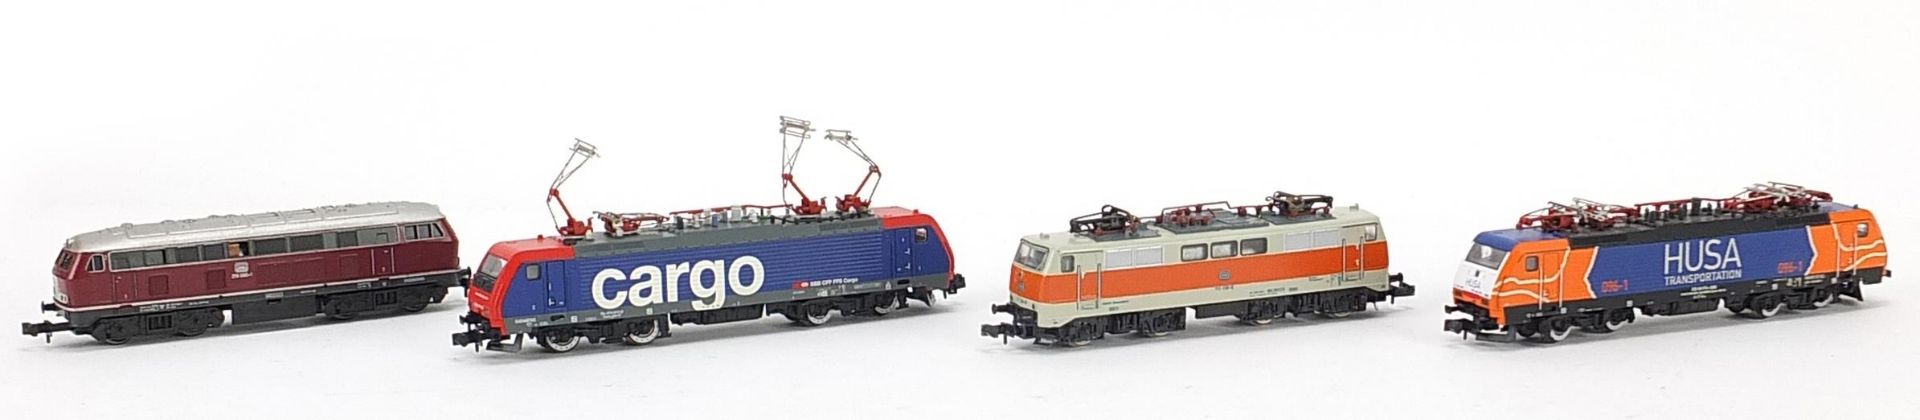 Four Trix and Minitrix N gauge model railway locomotives : For further information on this lot